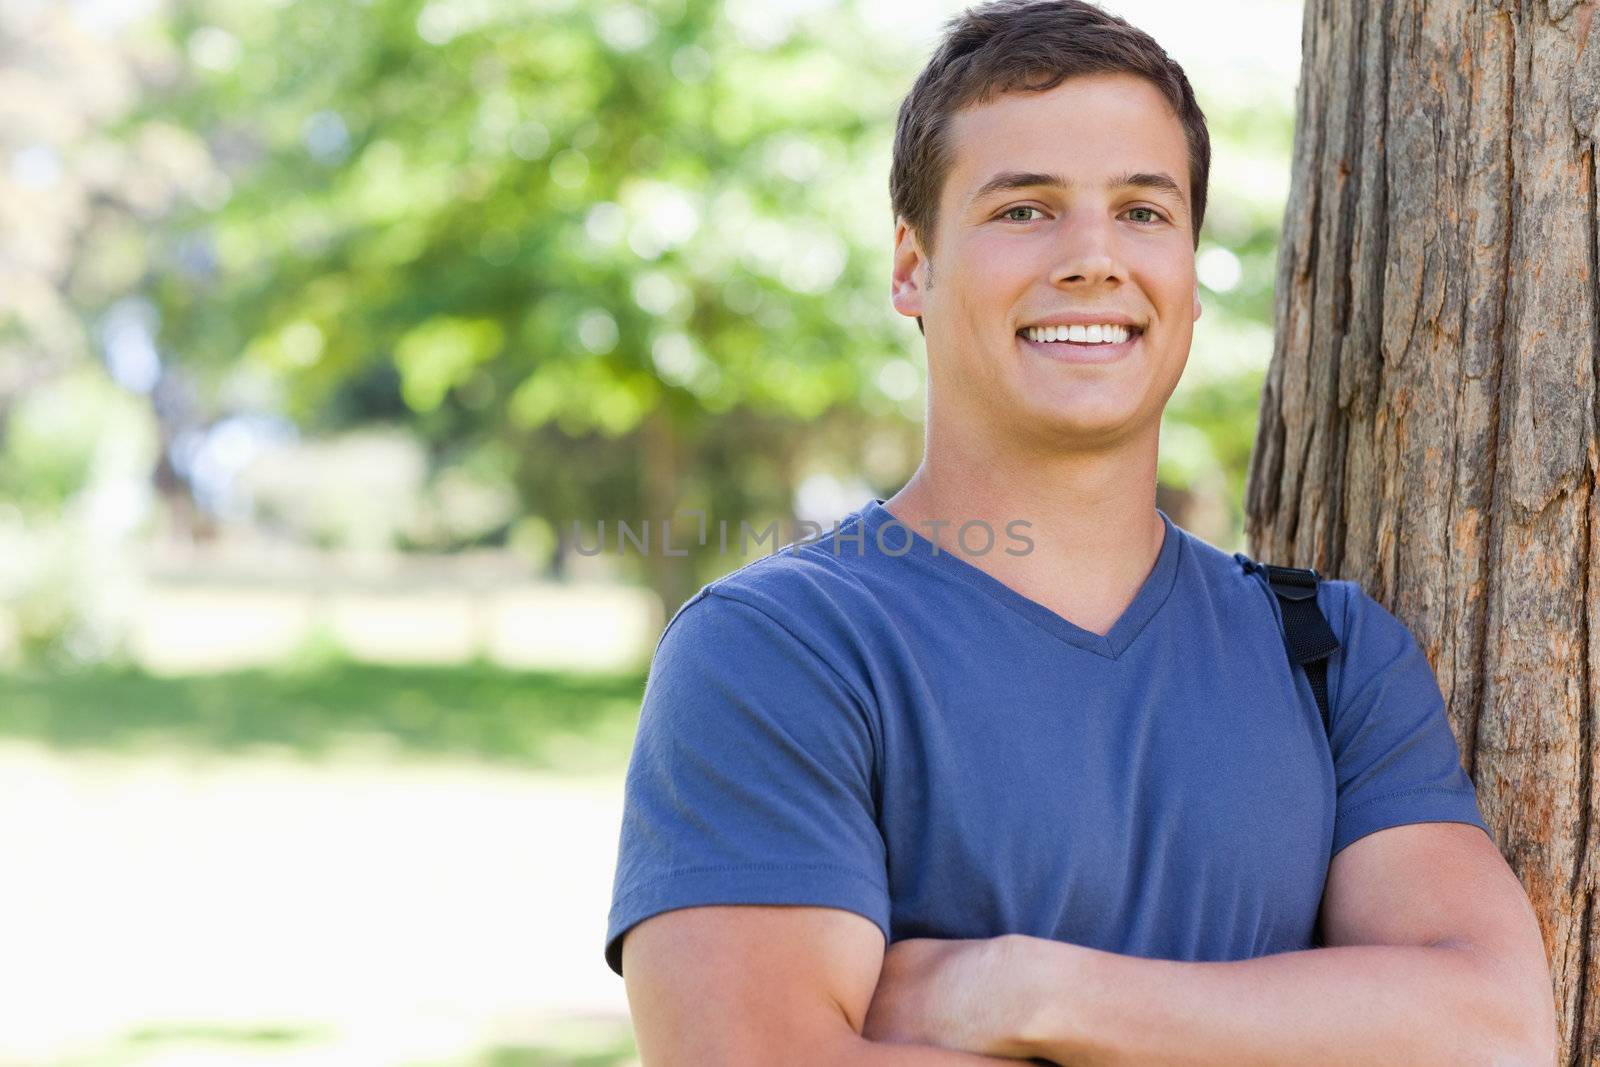 Portrait of a young man leaning against a tree in a park